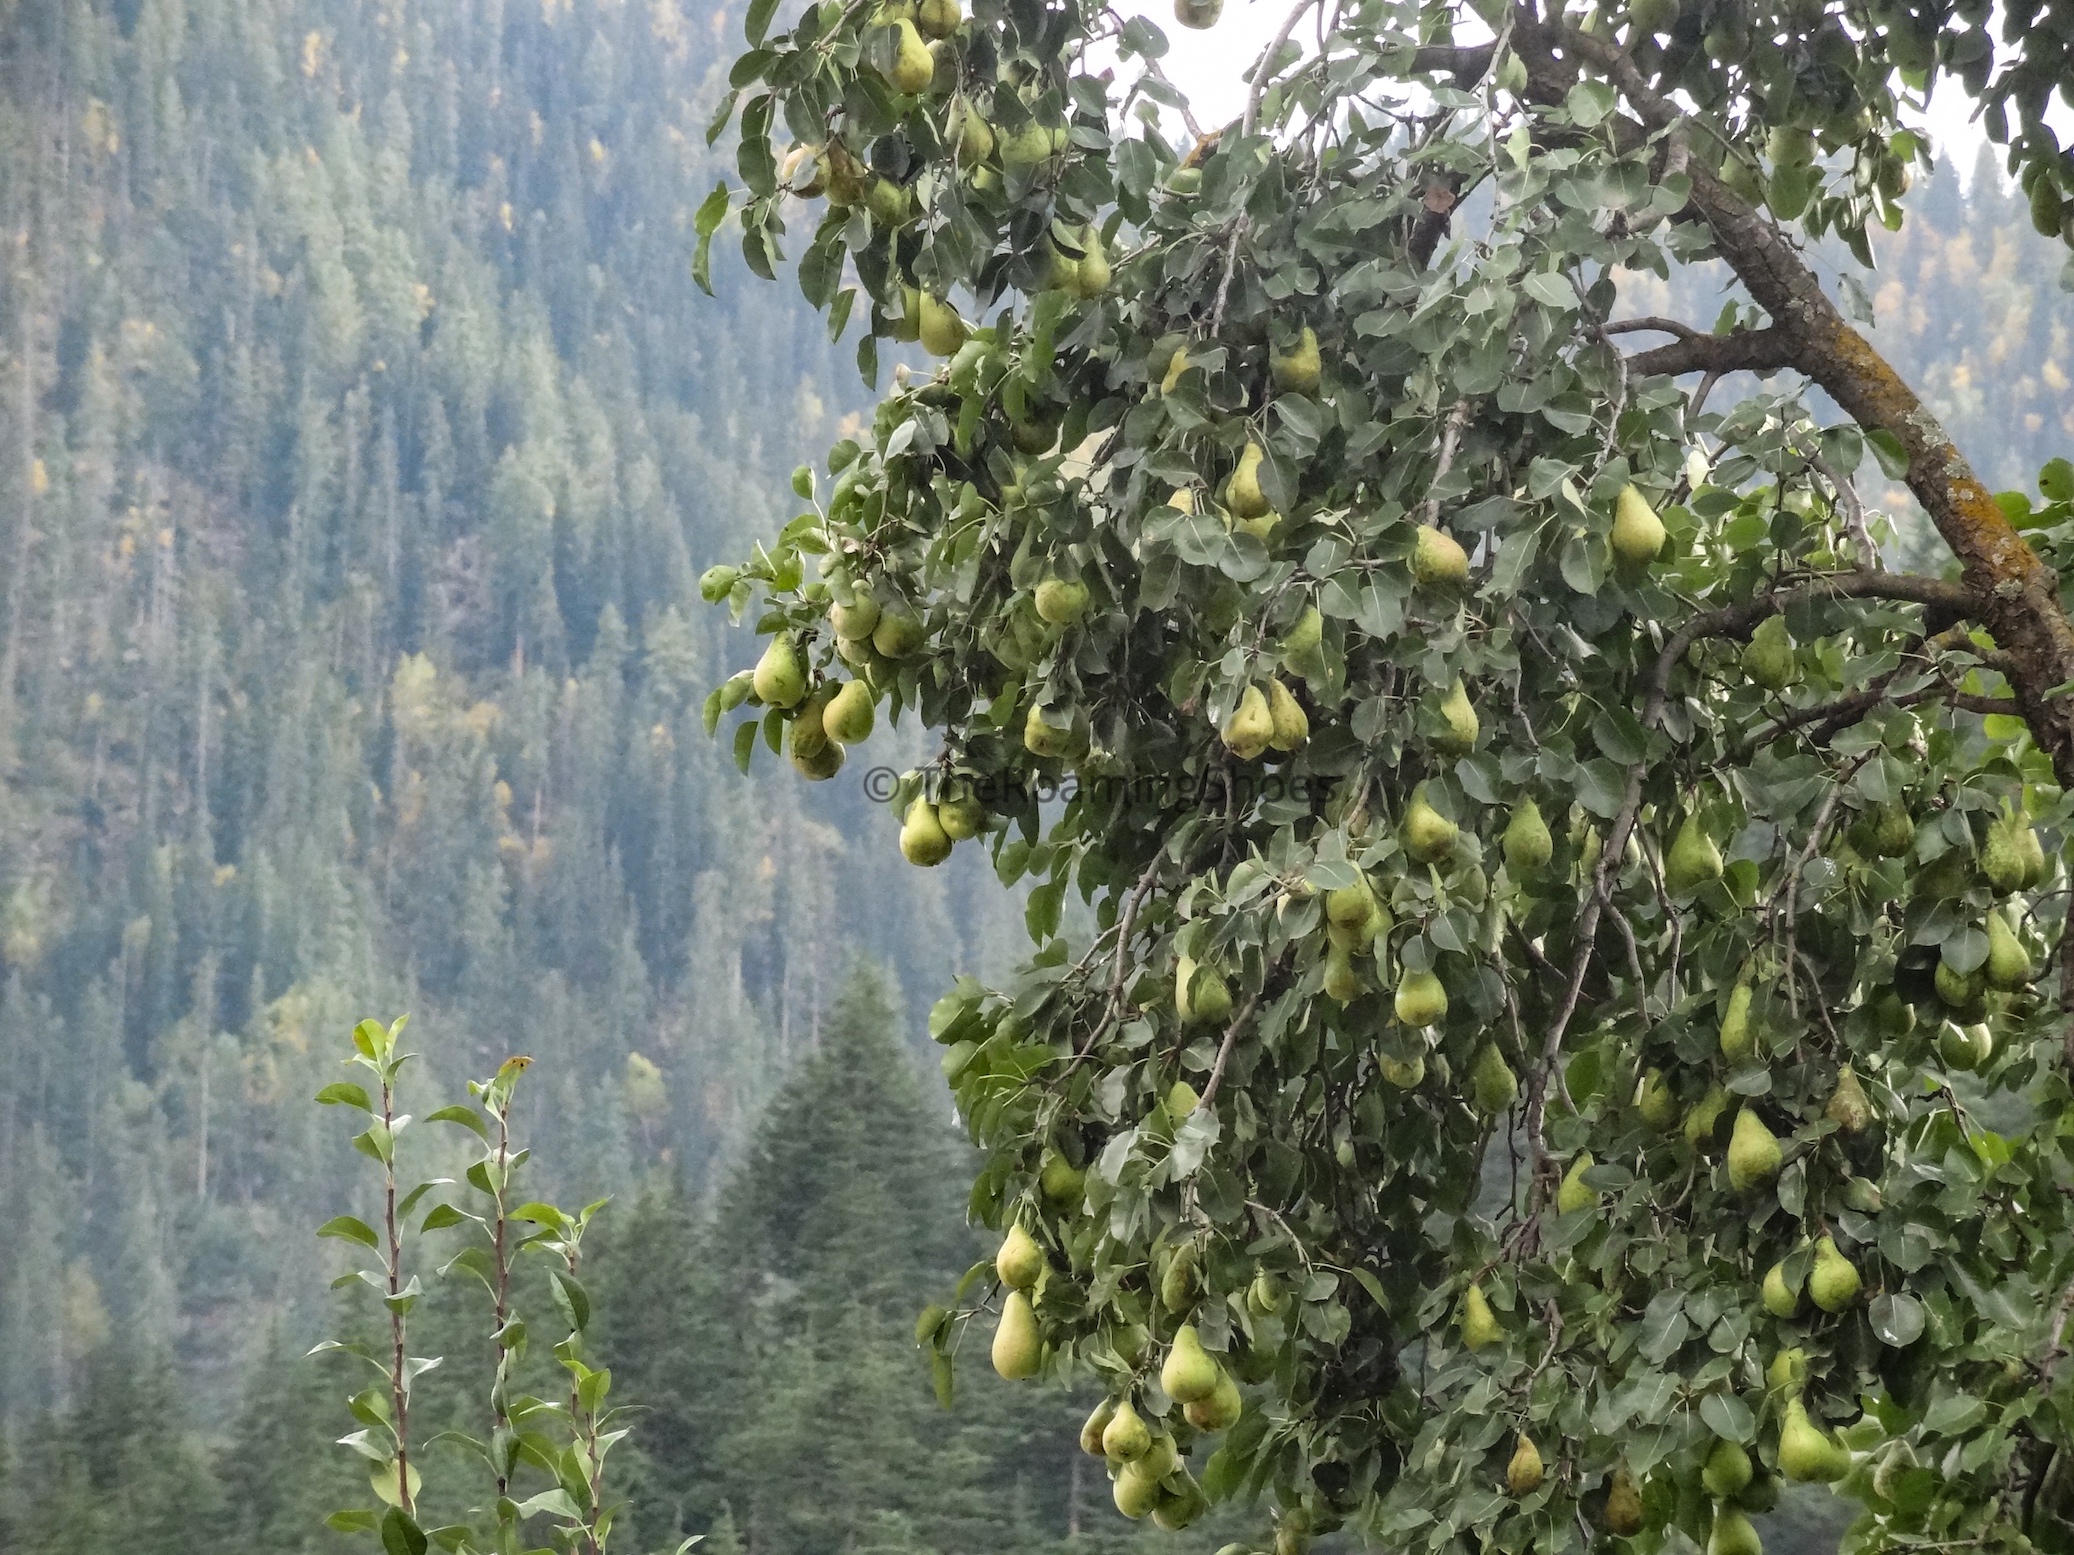 Tree loaded with Pears